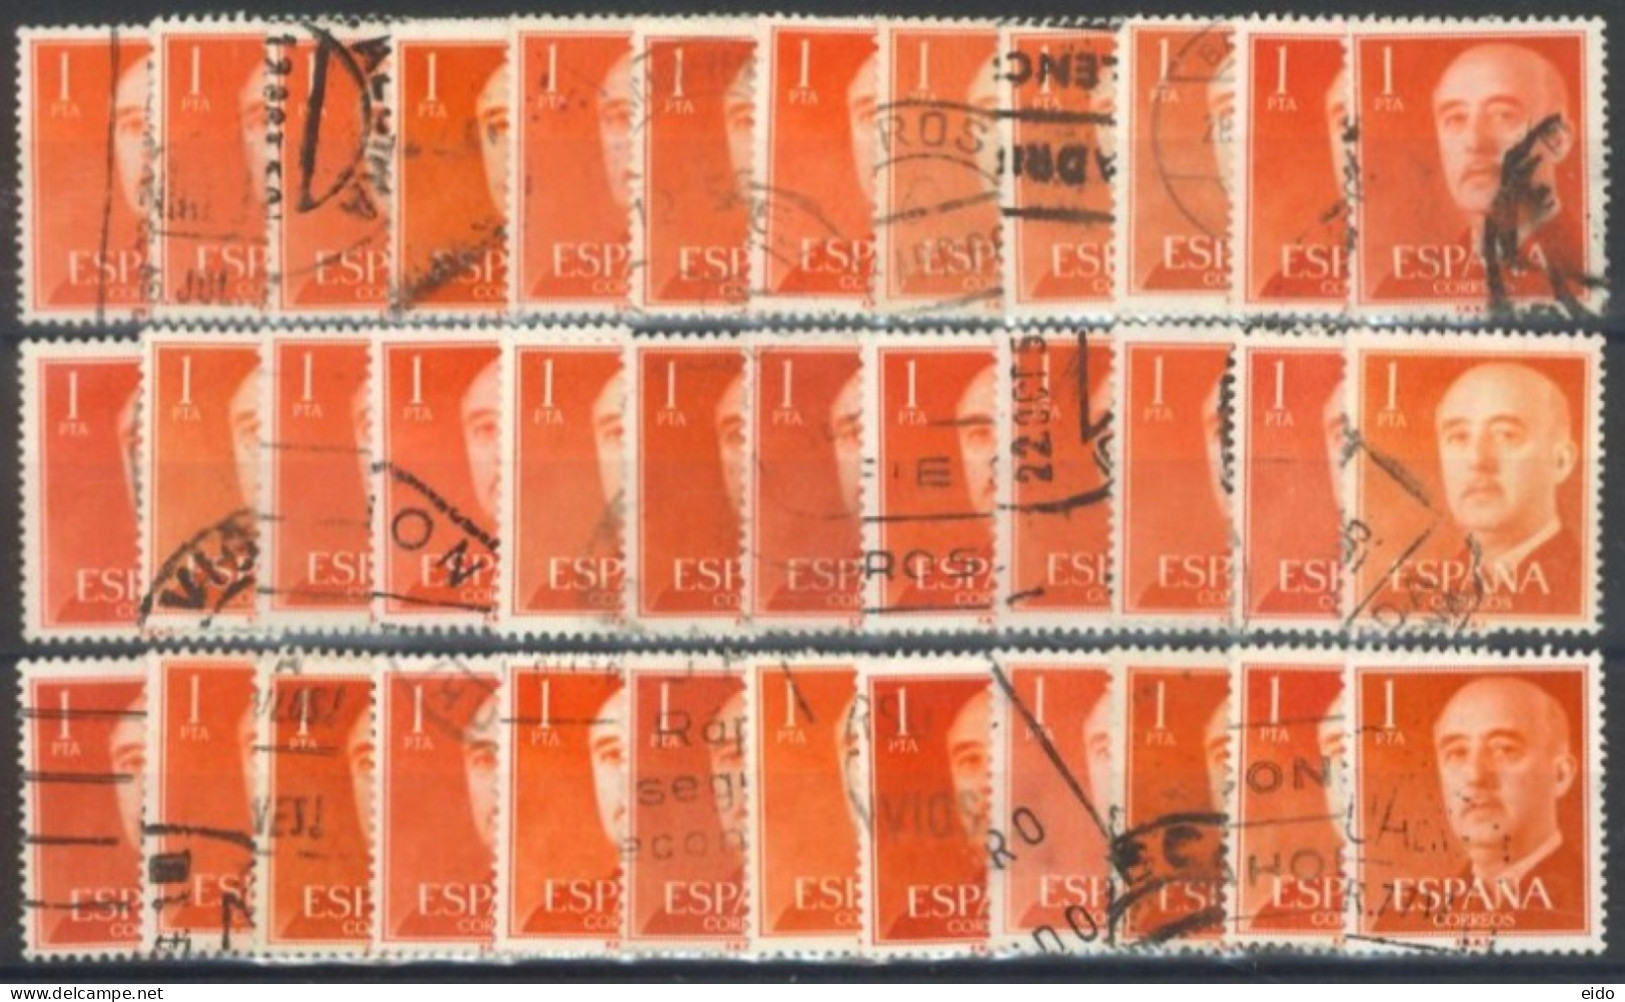 SPAIN- 1954/56, GENERAL FRANCO STAMP QTY : 36 REDUSED SPECIAL PRICE # 825, USED. - Gebraucht